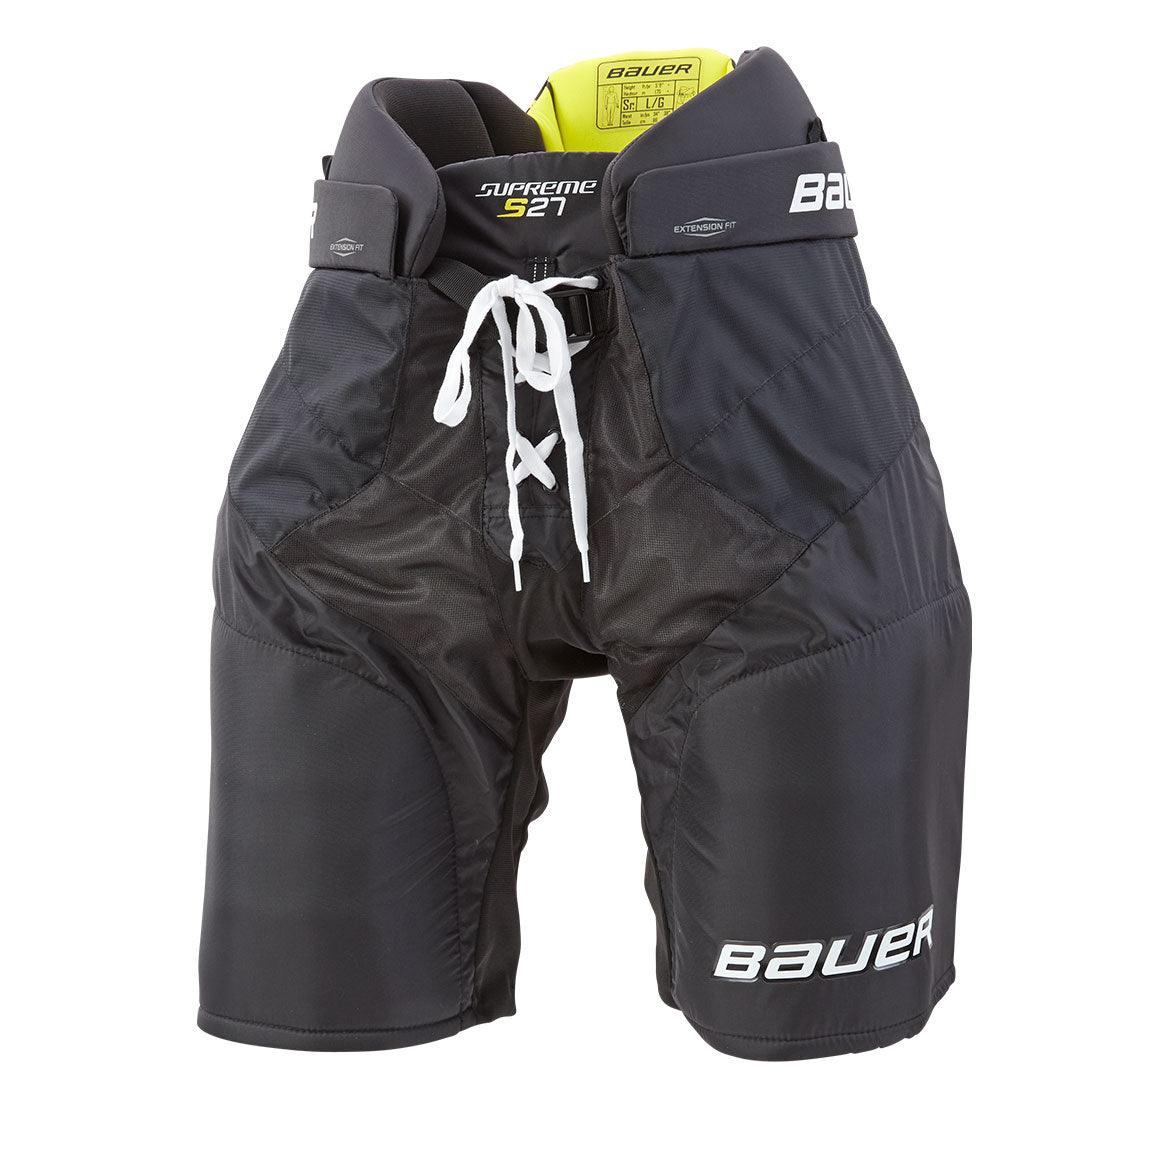 Supreme S27 Hockey Pants - Junior - Sports Excellence